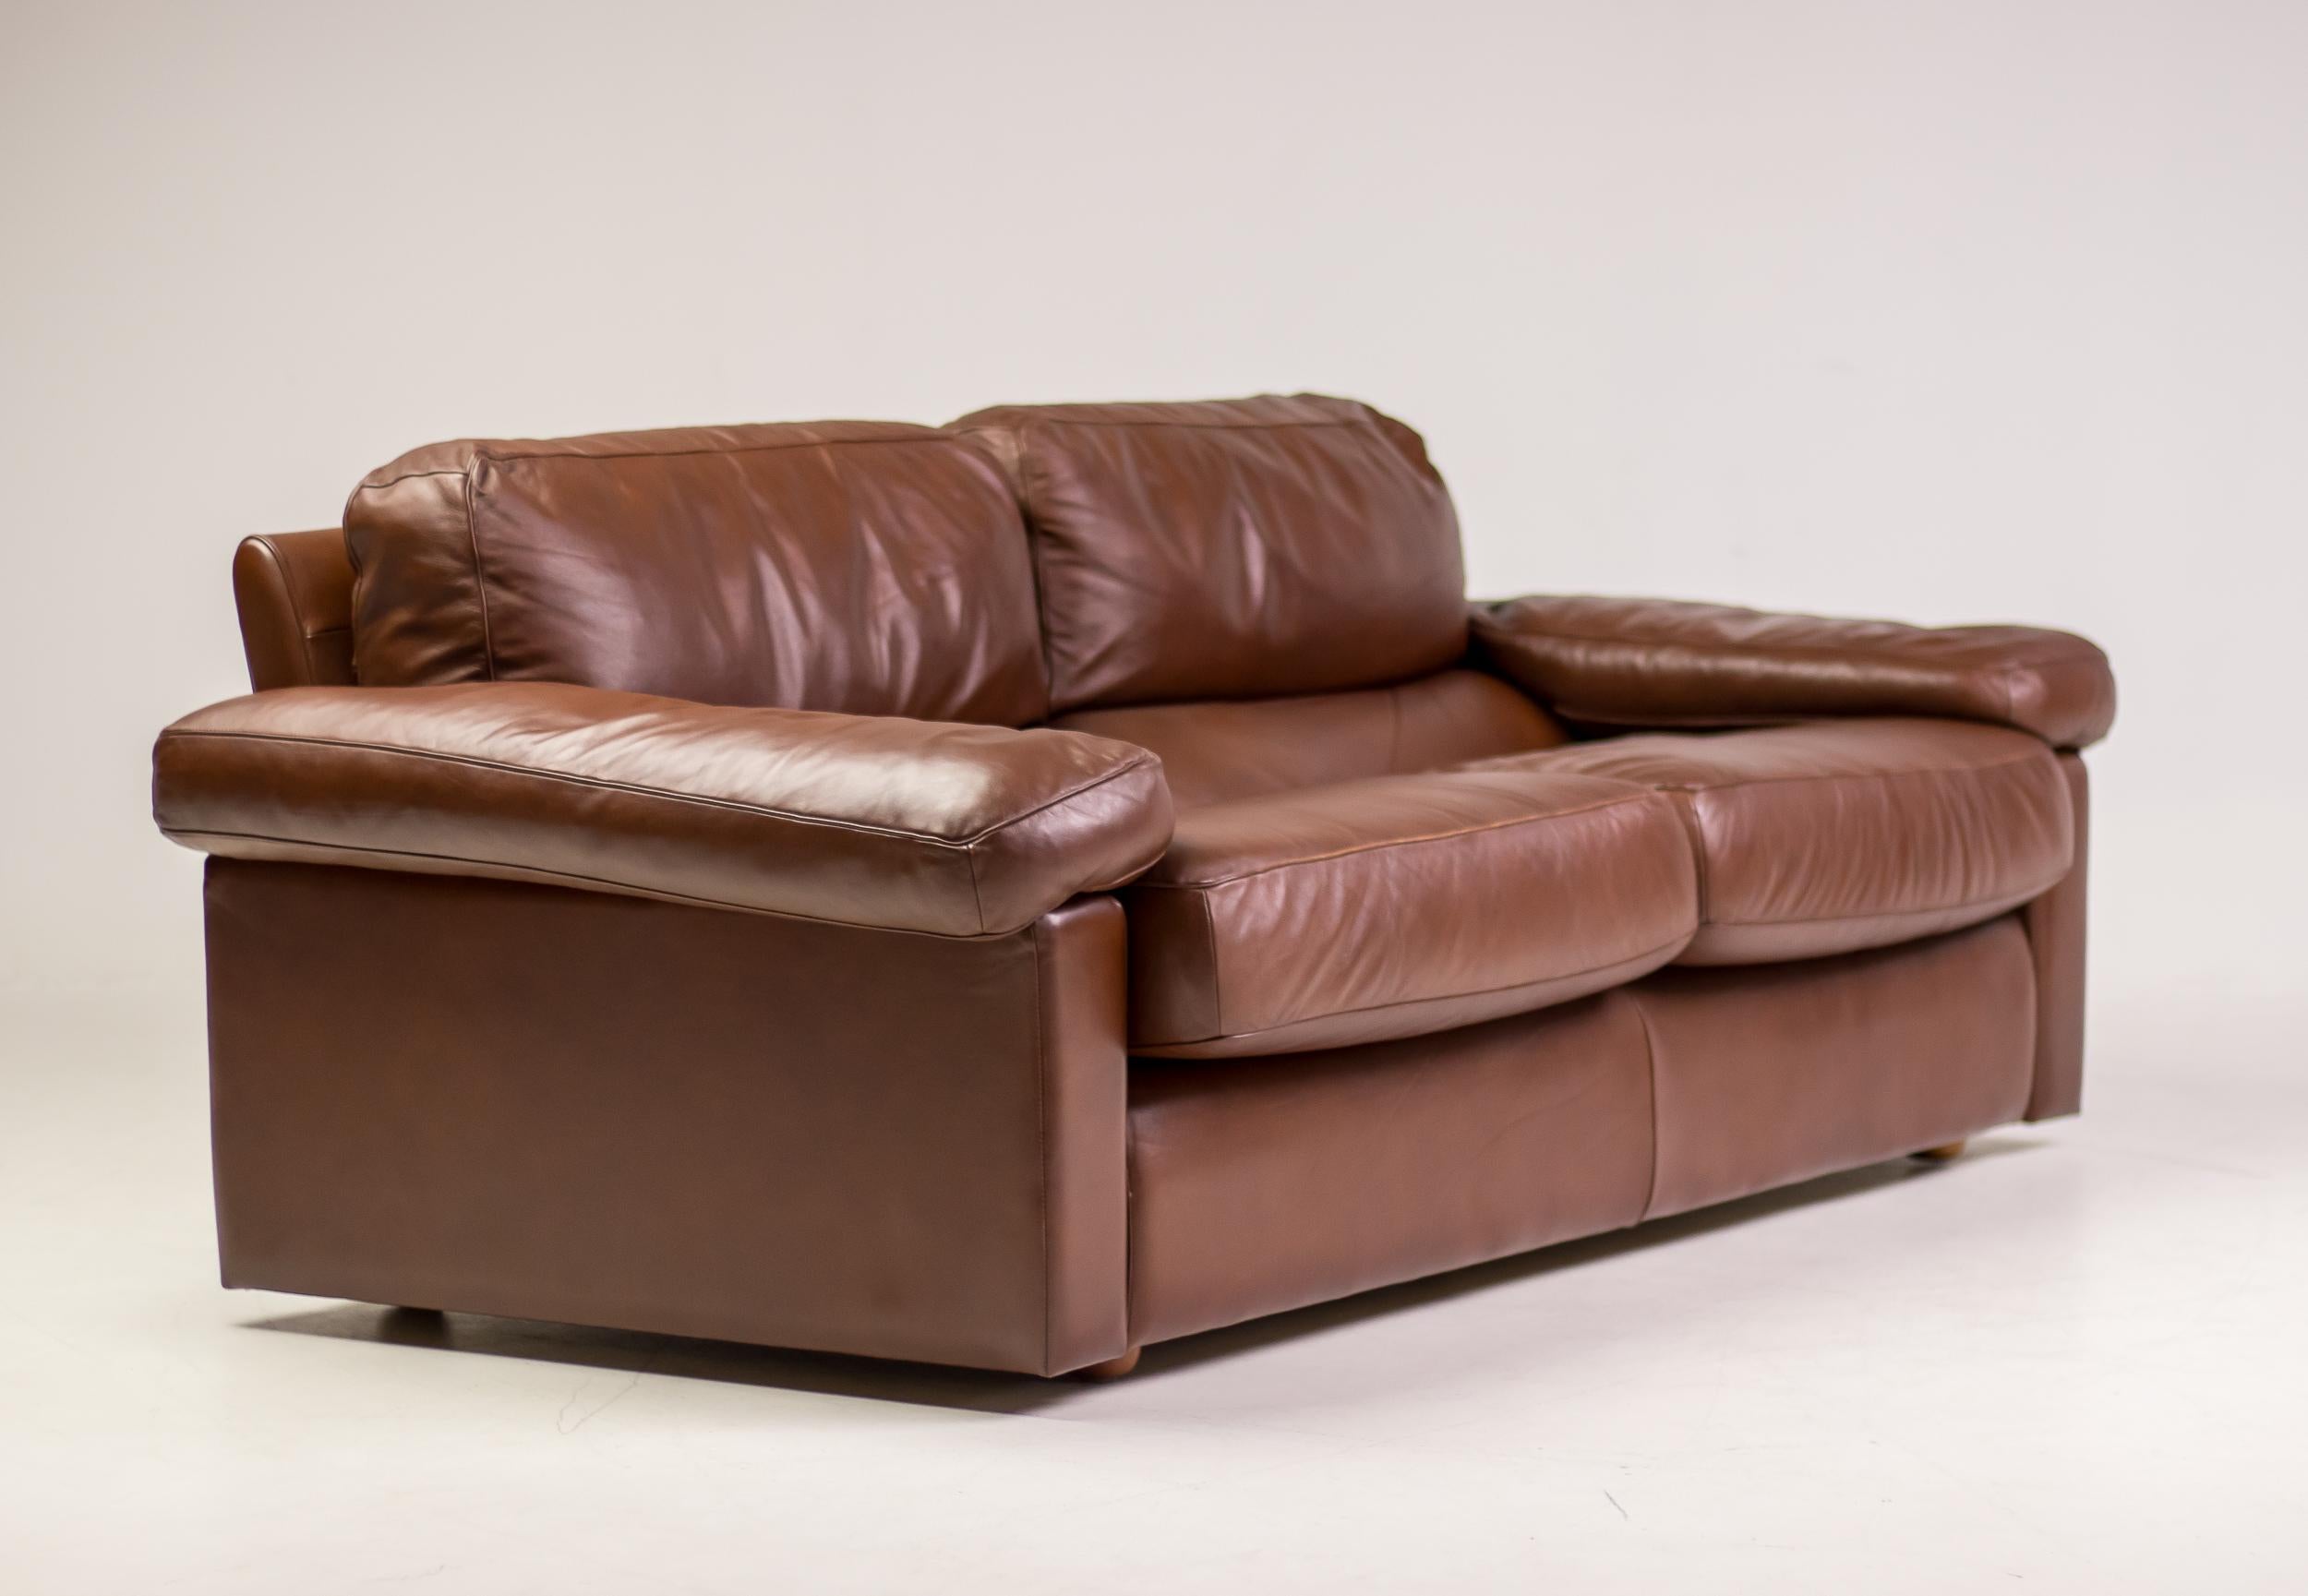 Distinctive Poltrona Frau Petronio sofa from the premium collection in the late 1970s. 
This super comfortable down-filled 2-seater is upholstered in premium quality chestnut leather.
Marked underneath the cushions and in leather of the seat